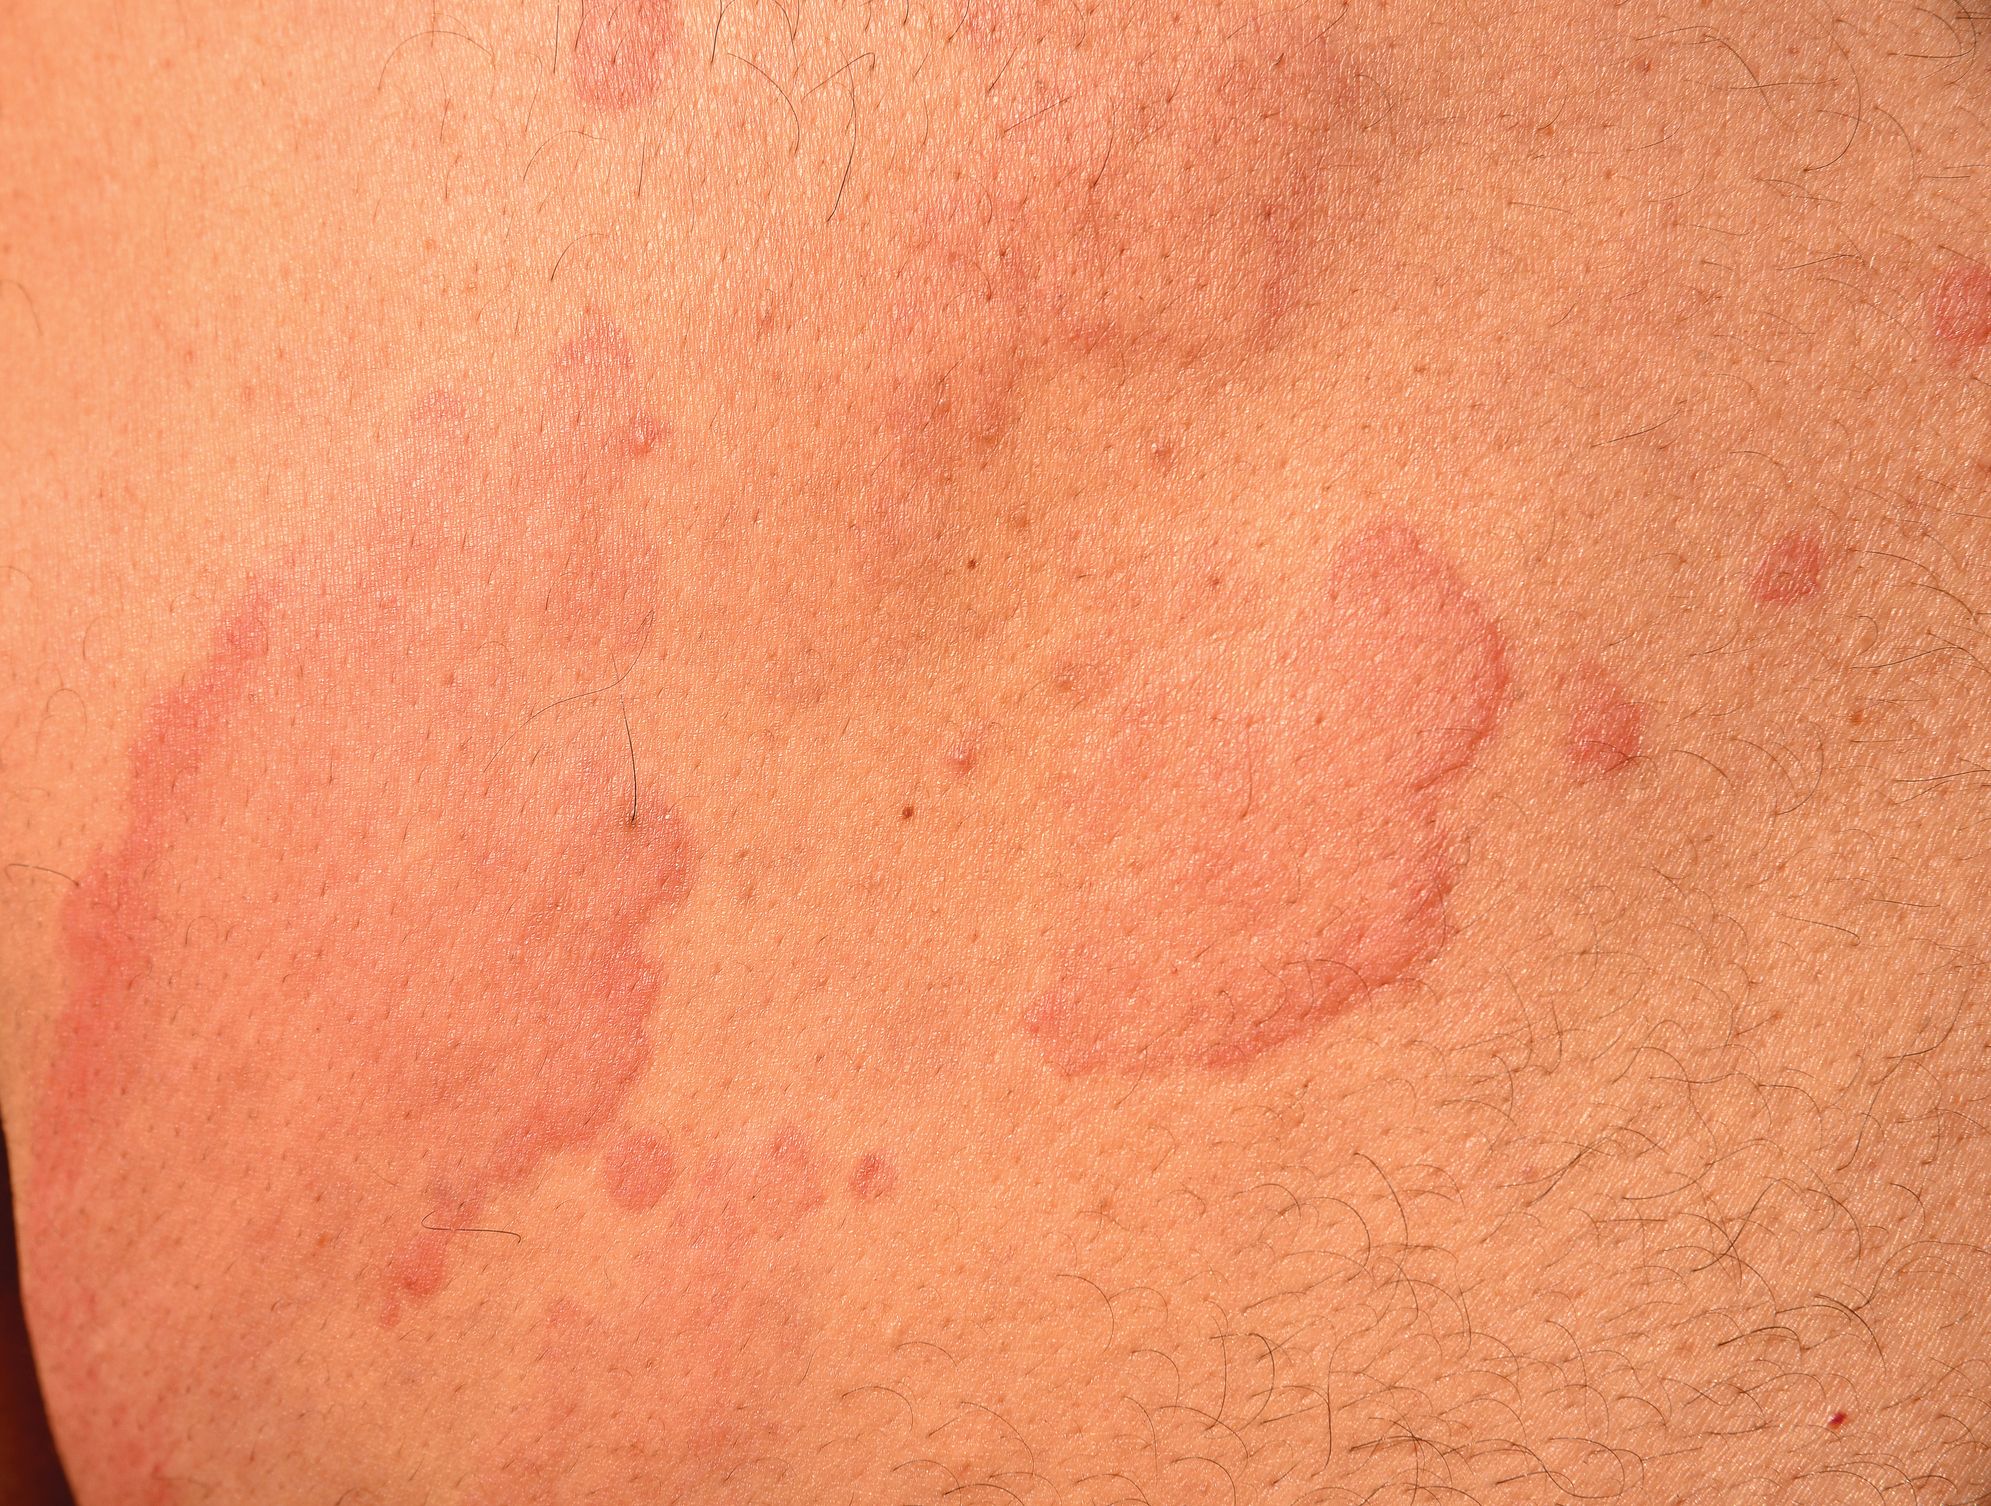 19 Common Bug Bite Pictures - How to ID Insect Bites and Stings